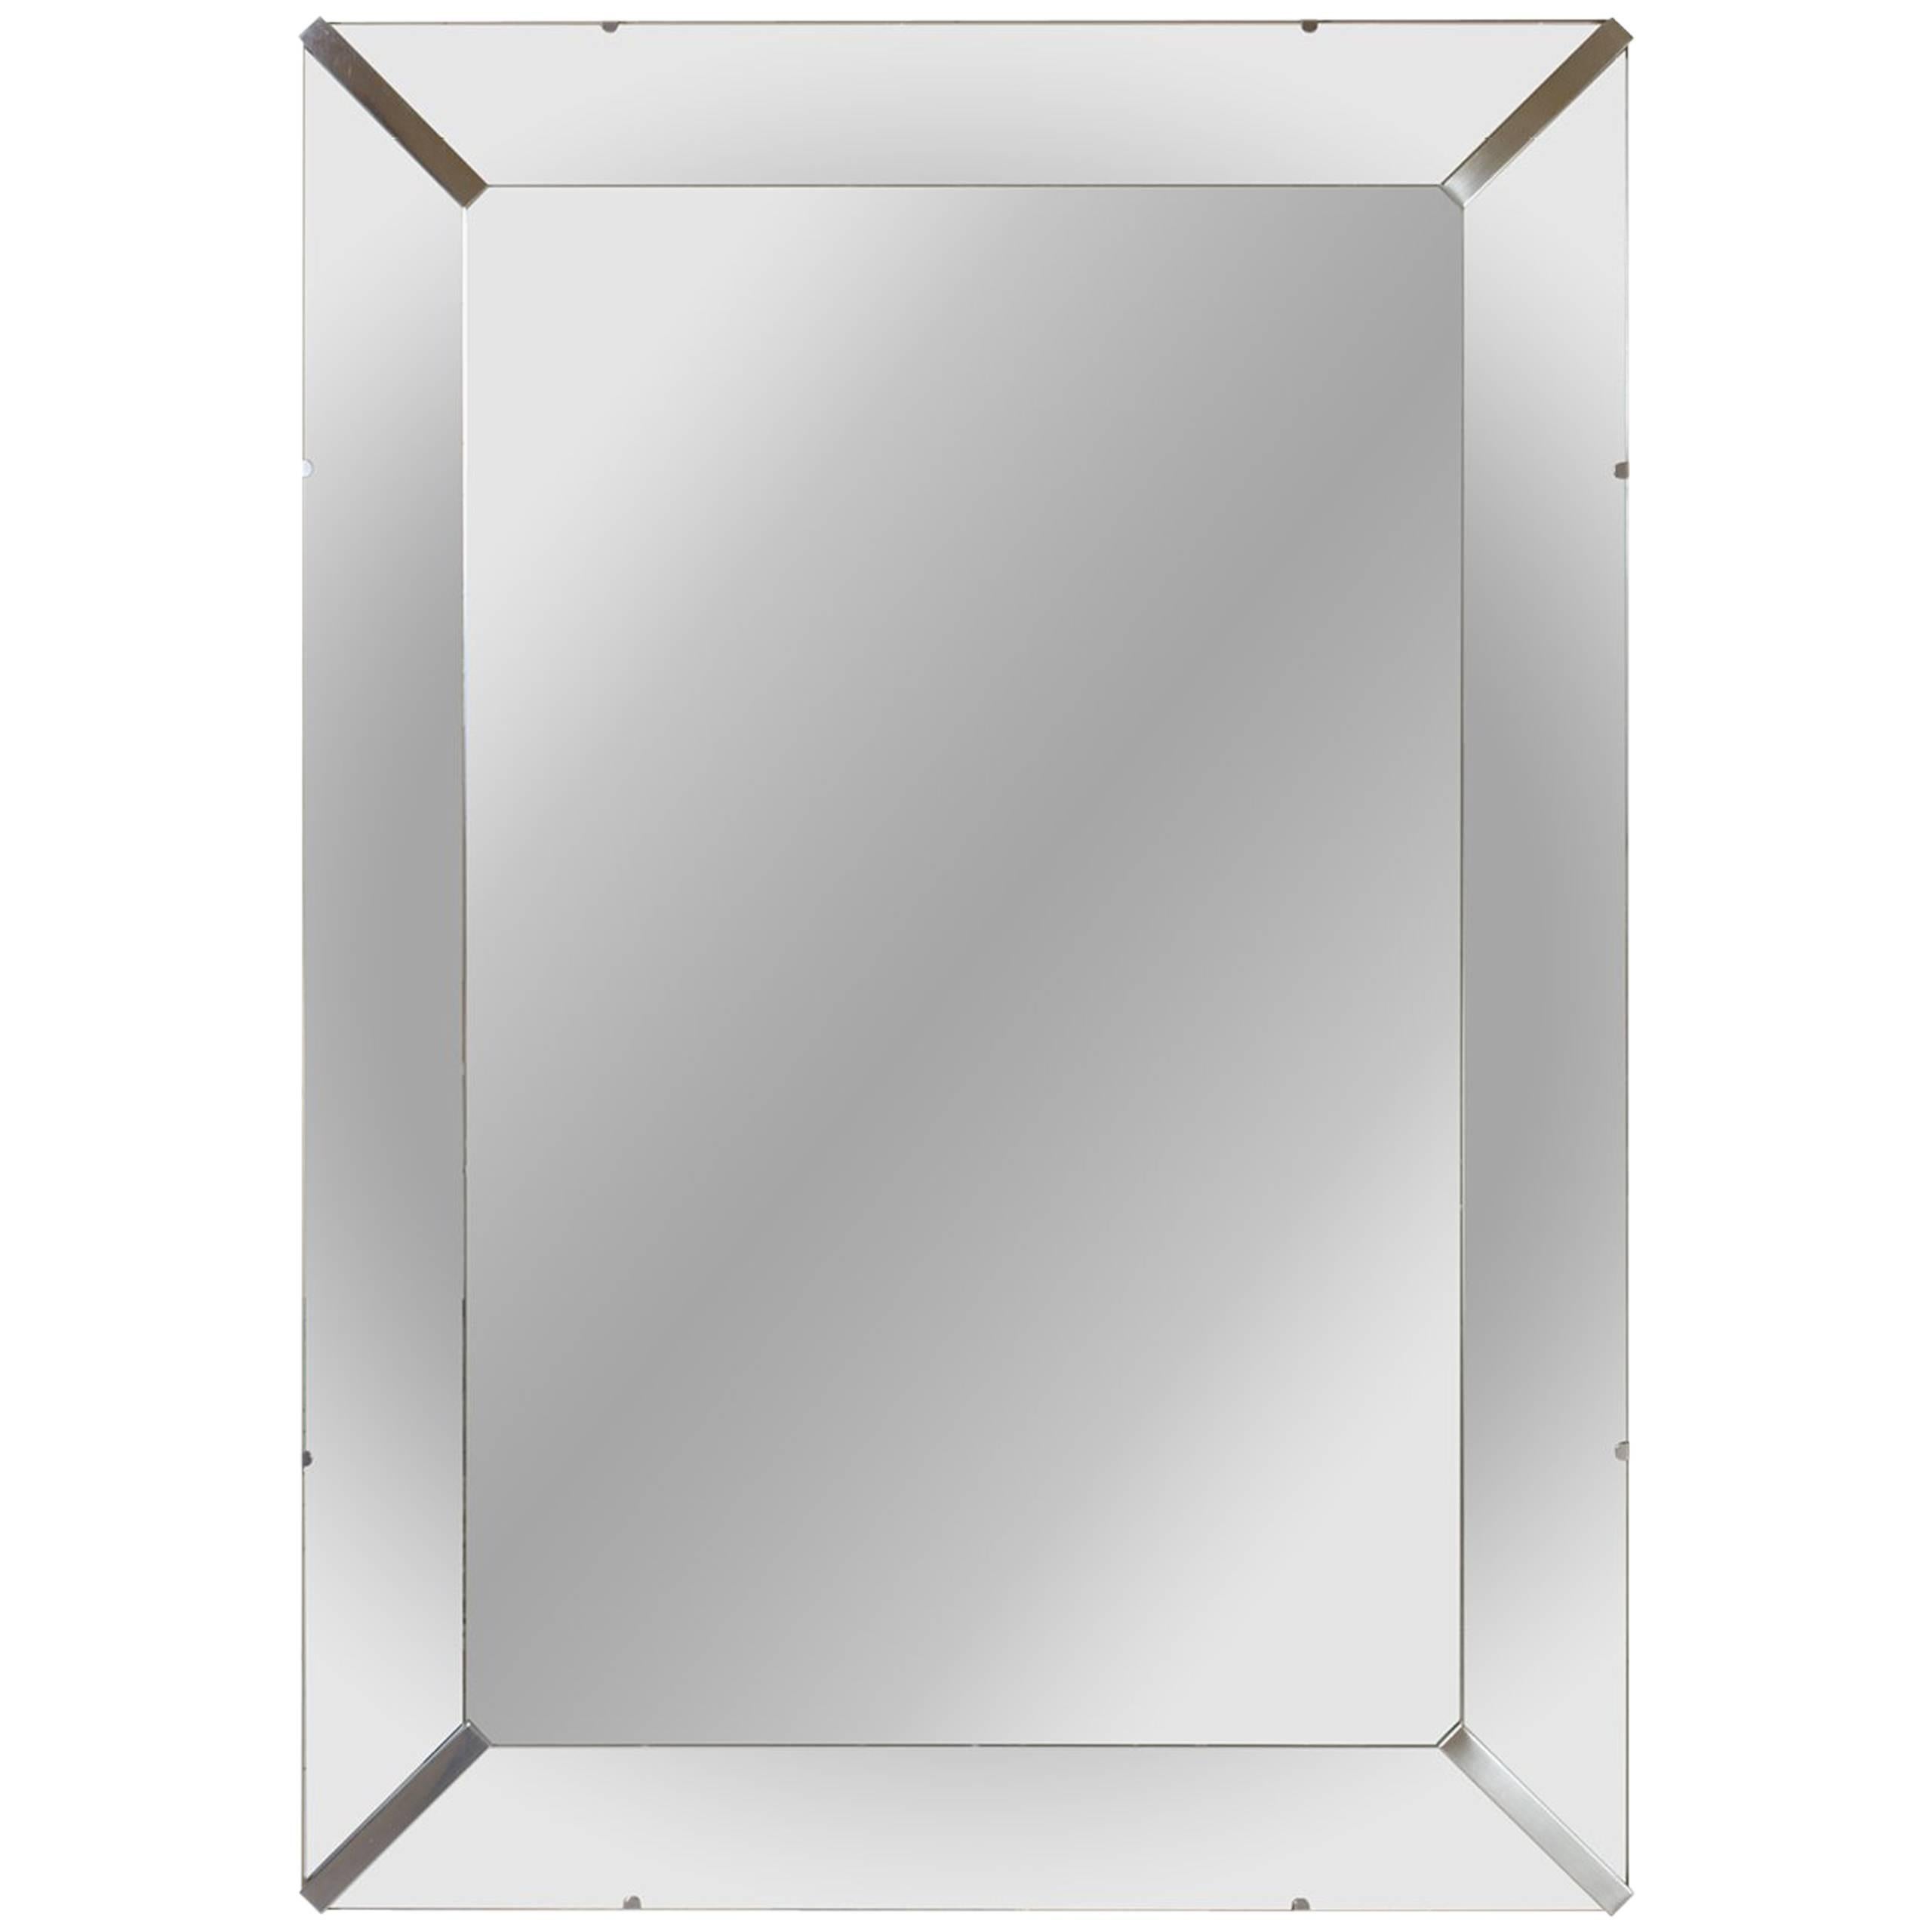 Grand Beveled Mirror with Nickel Corner Accents